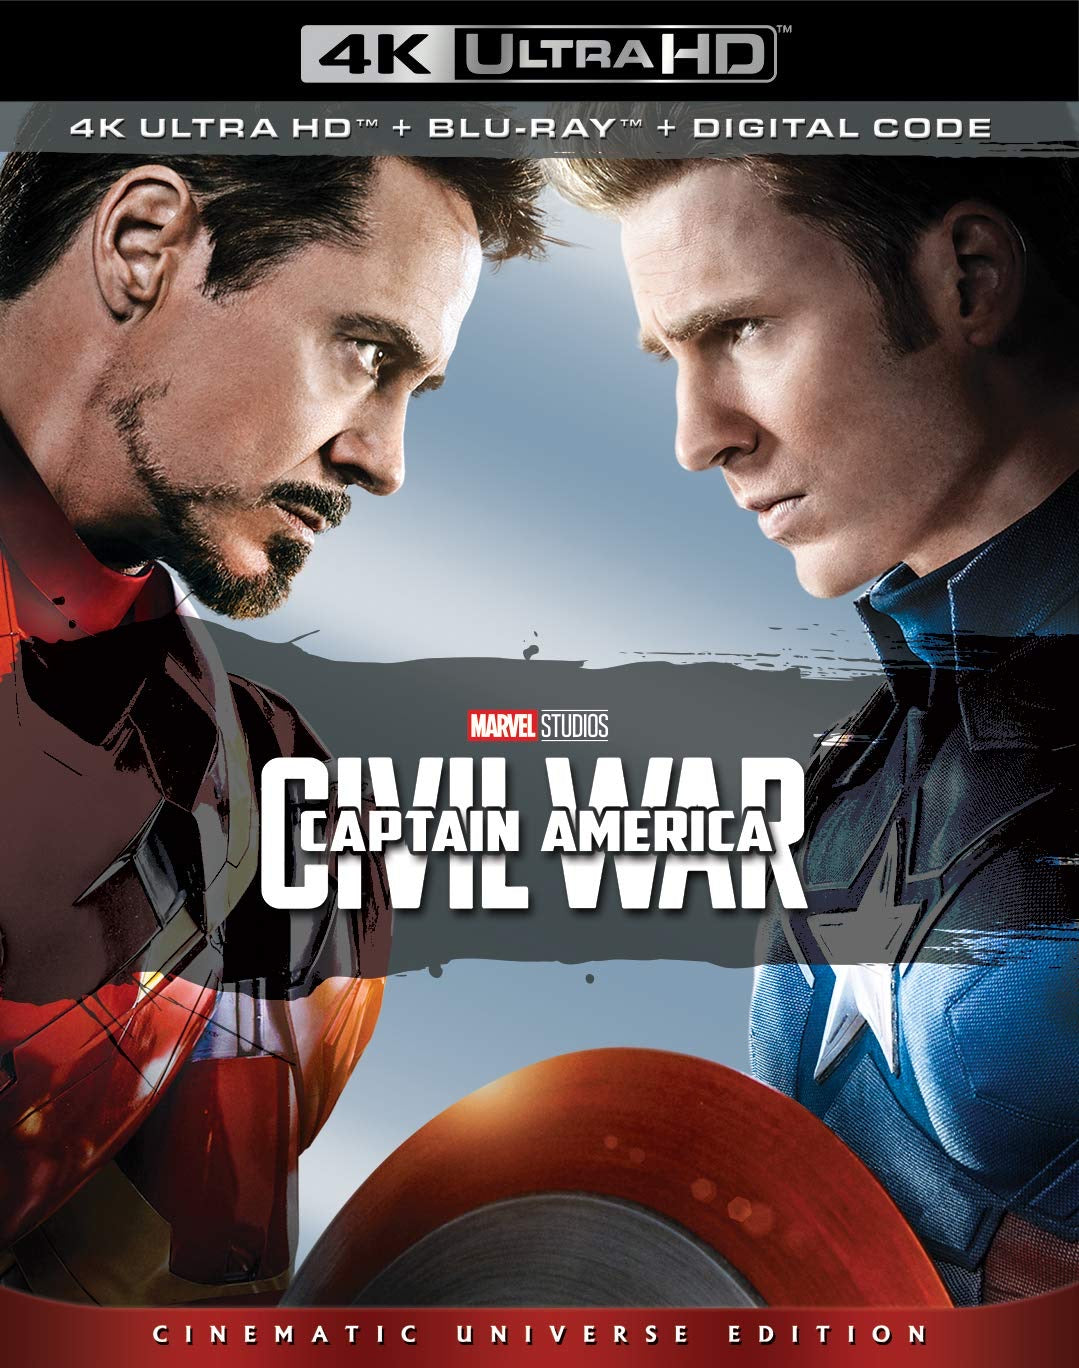 Captain America: Civil War (2016) Vudu or Movies Anywhere 4K redemption only